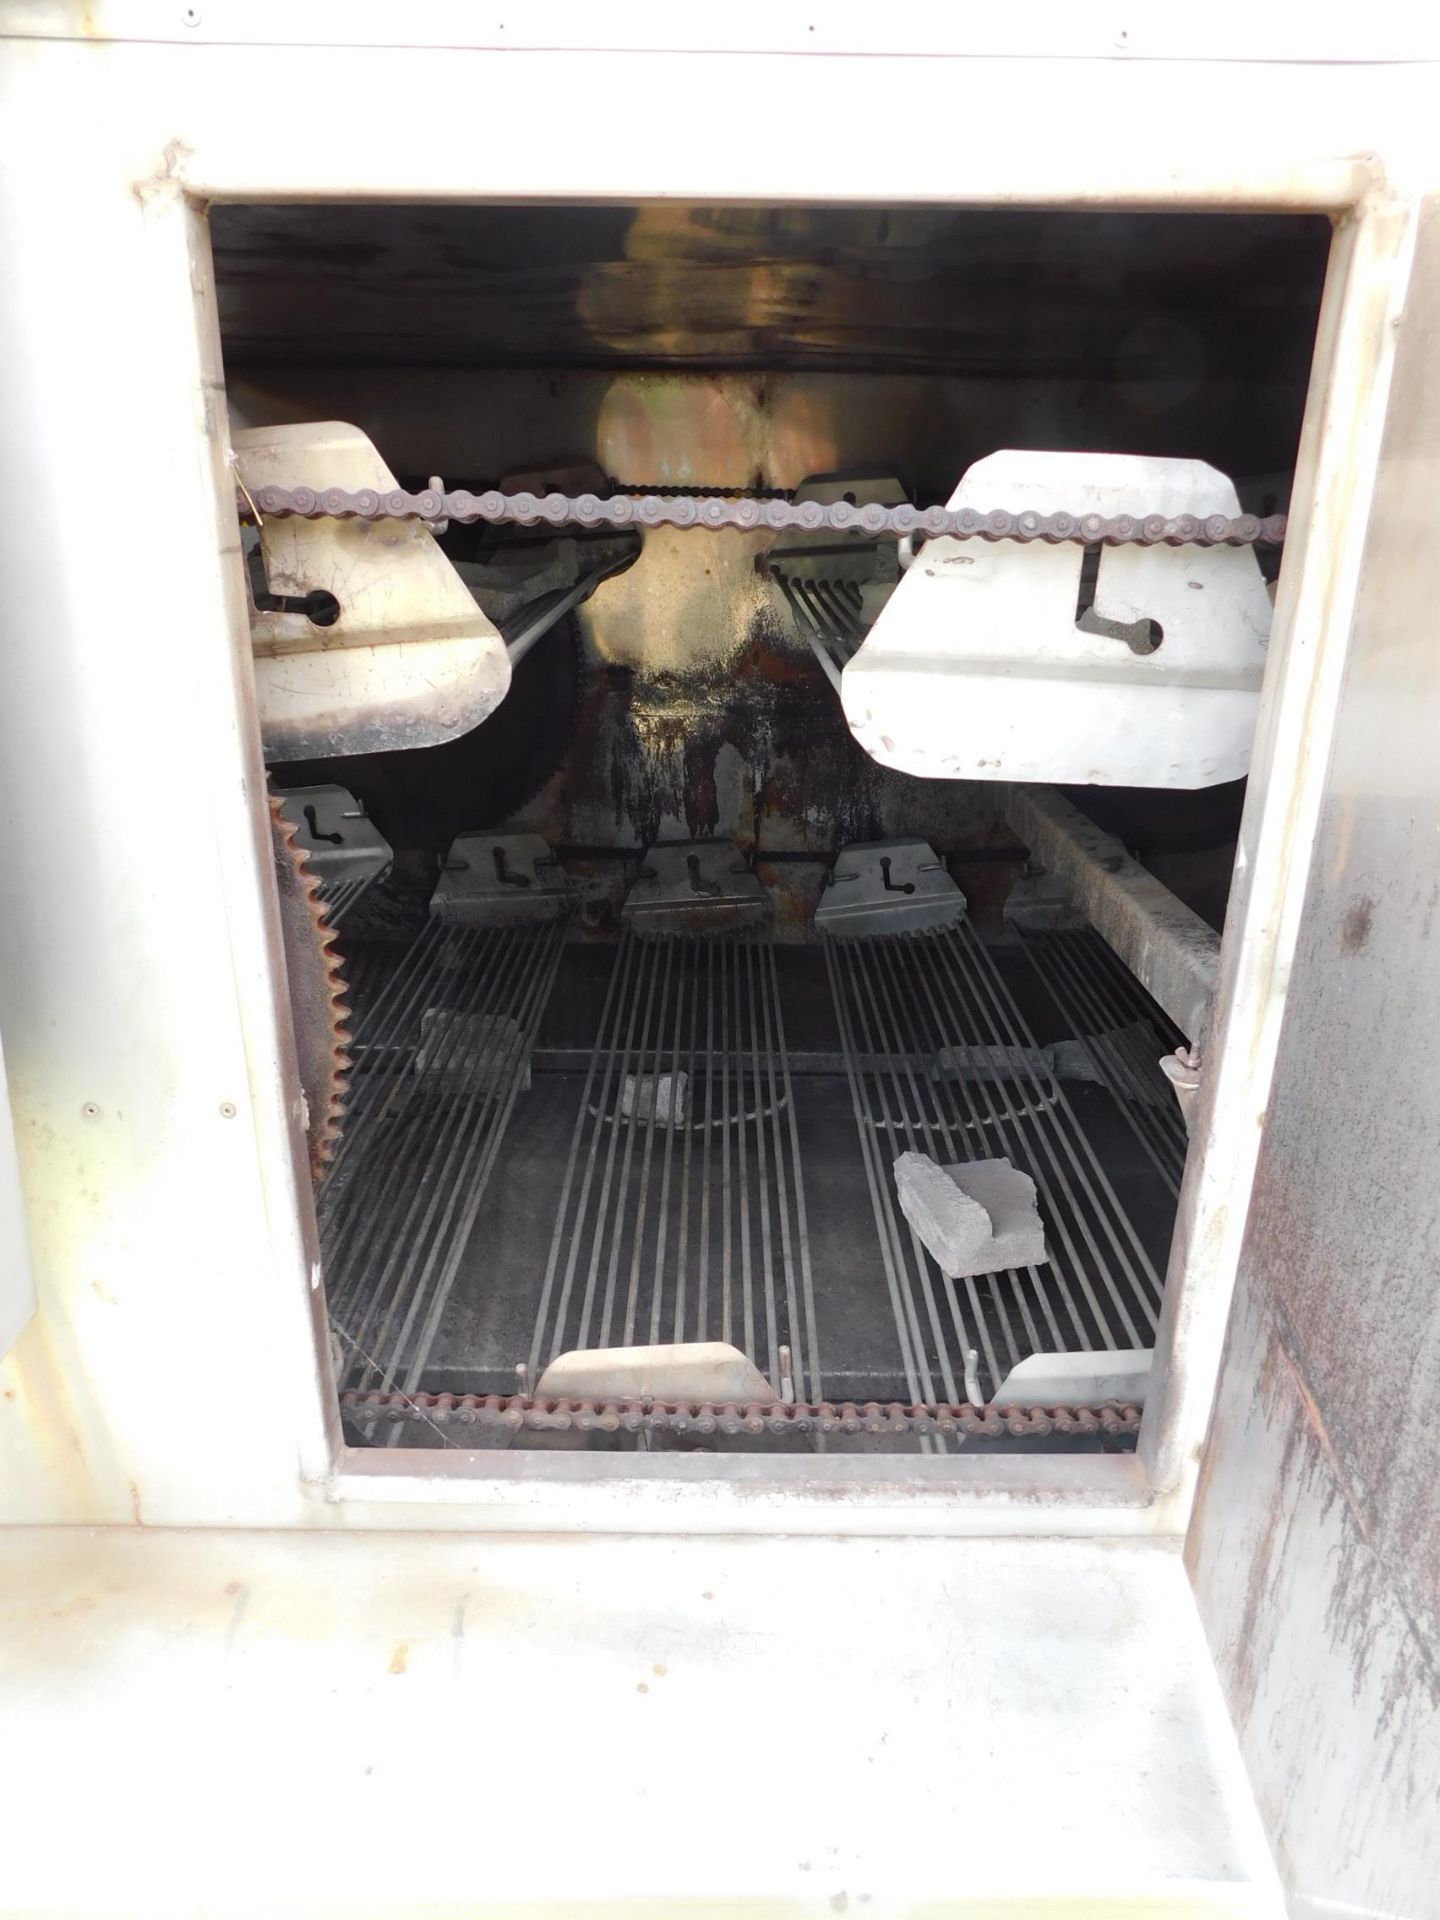 Holstein Maxi Model 400 Chicken, Rib,Beef Cooker Trailed Mounted 24 Removable Racks, Double walled - Image 30 of 49